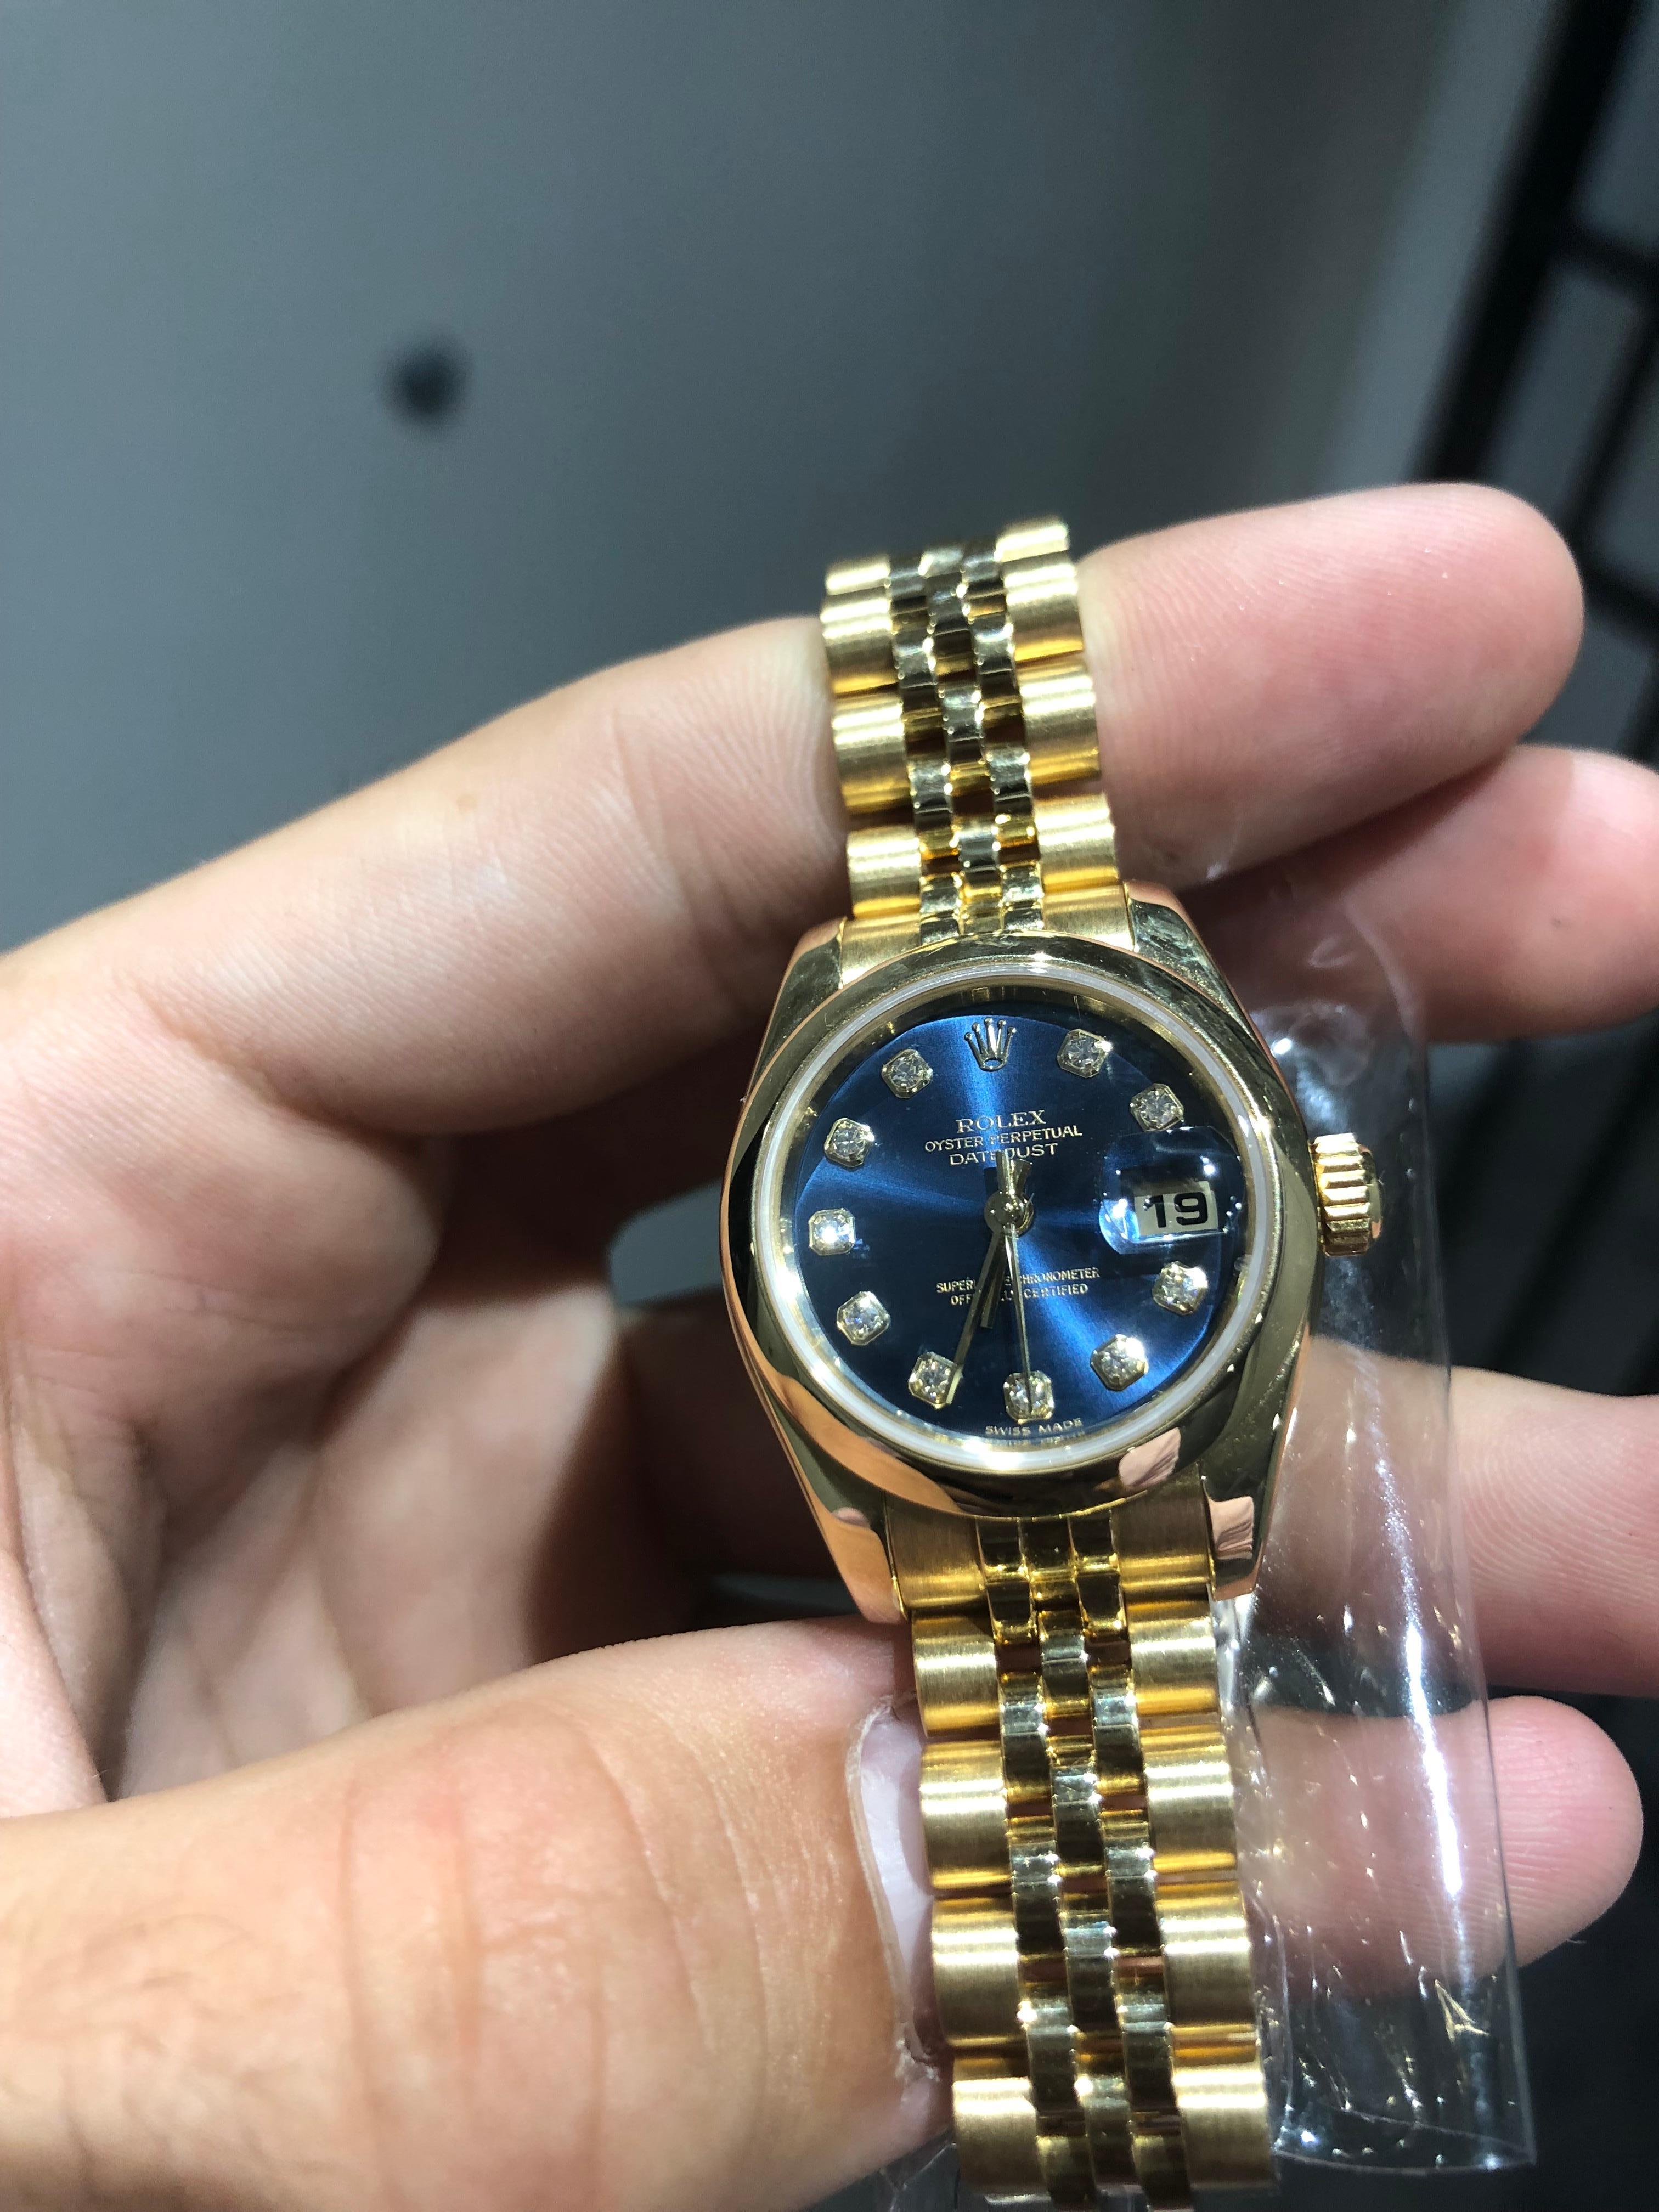 An 18k Yellow Gold Oyster Perpetual Datejust Ladies Wristwatch, blue dial with 10 applied round brilliant cut diamond hour markers, date at 3 0'clock, a fixed 18k yellow gold smooth bezel, an 18k yellow gold jubilee bracelet with a concealed 18k